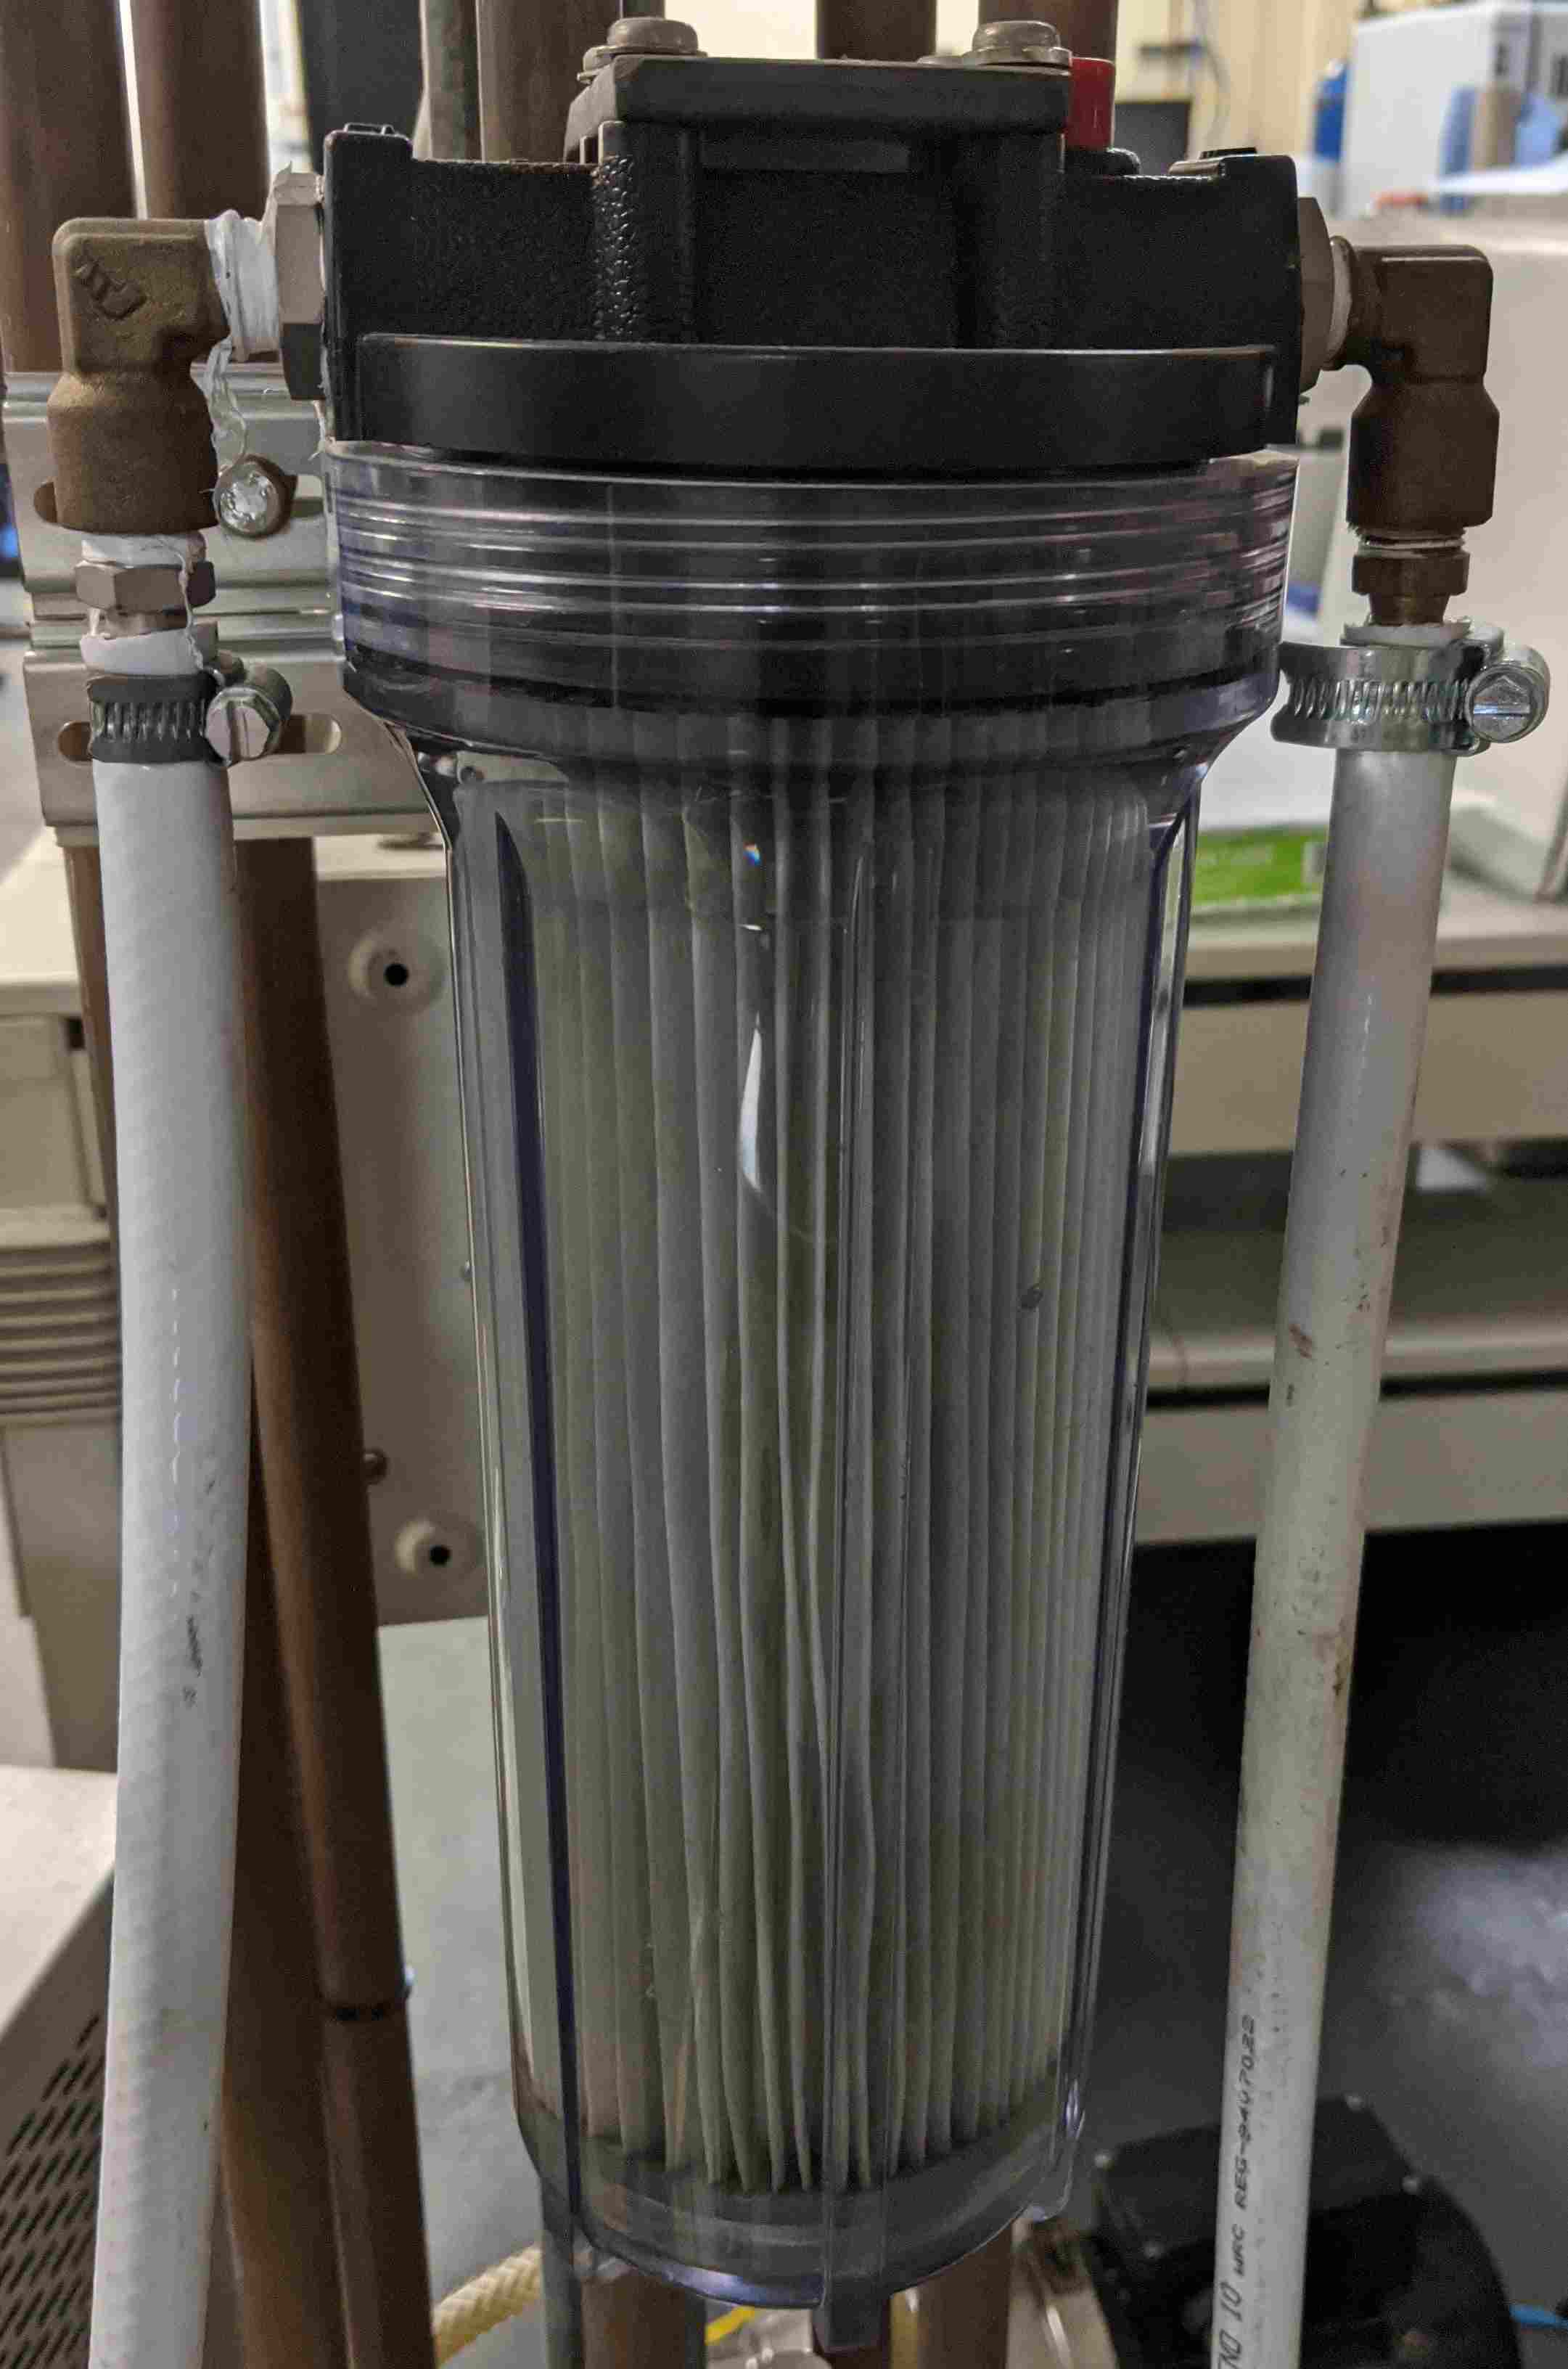 Pleated fibre Water system filter cartridge to collect particles and debris